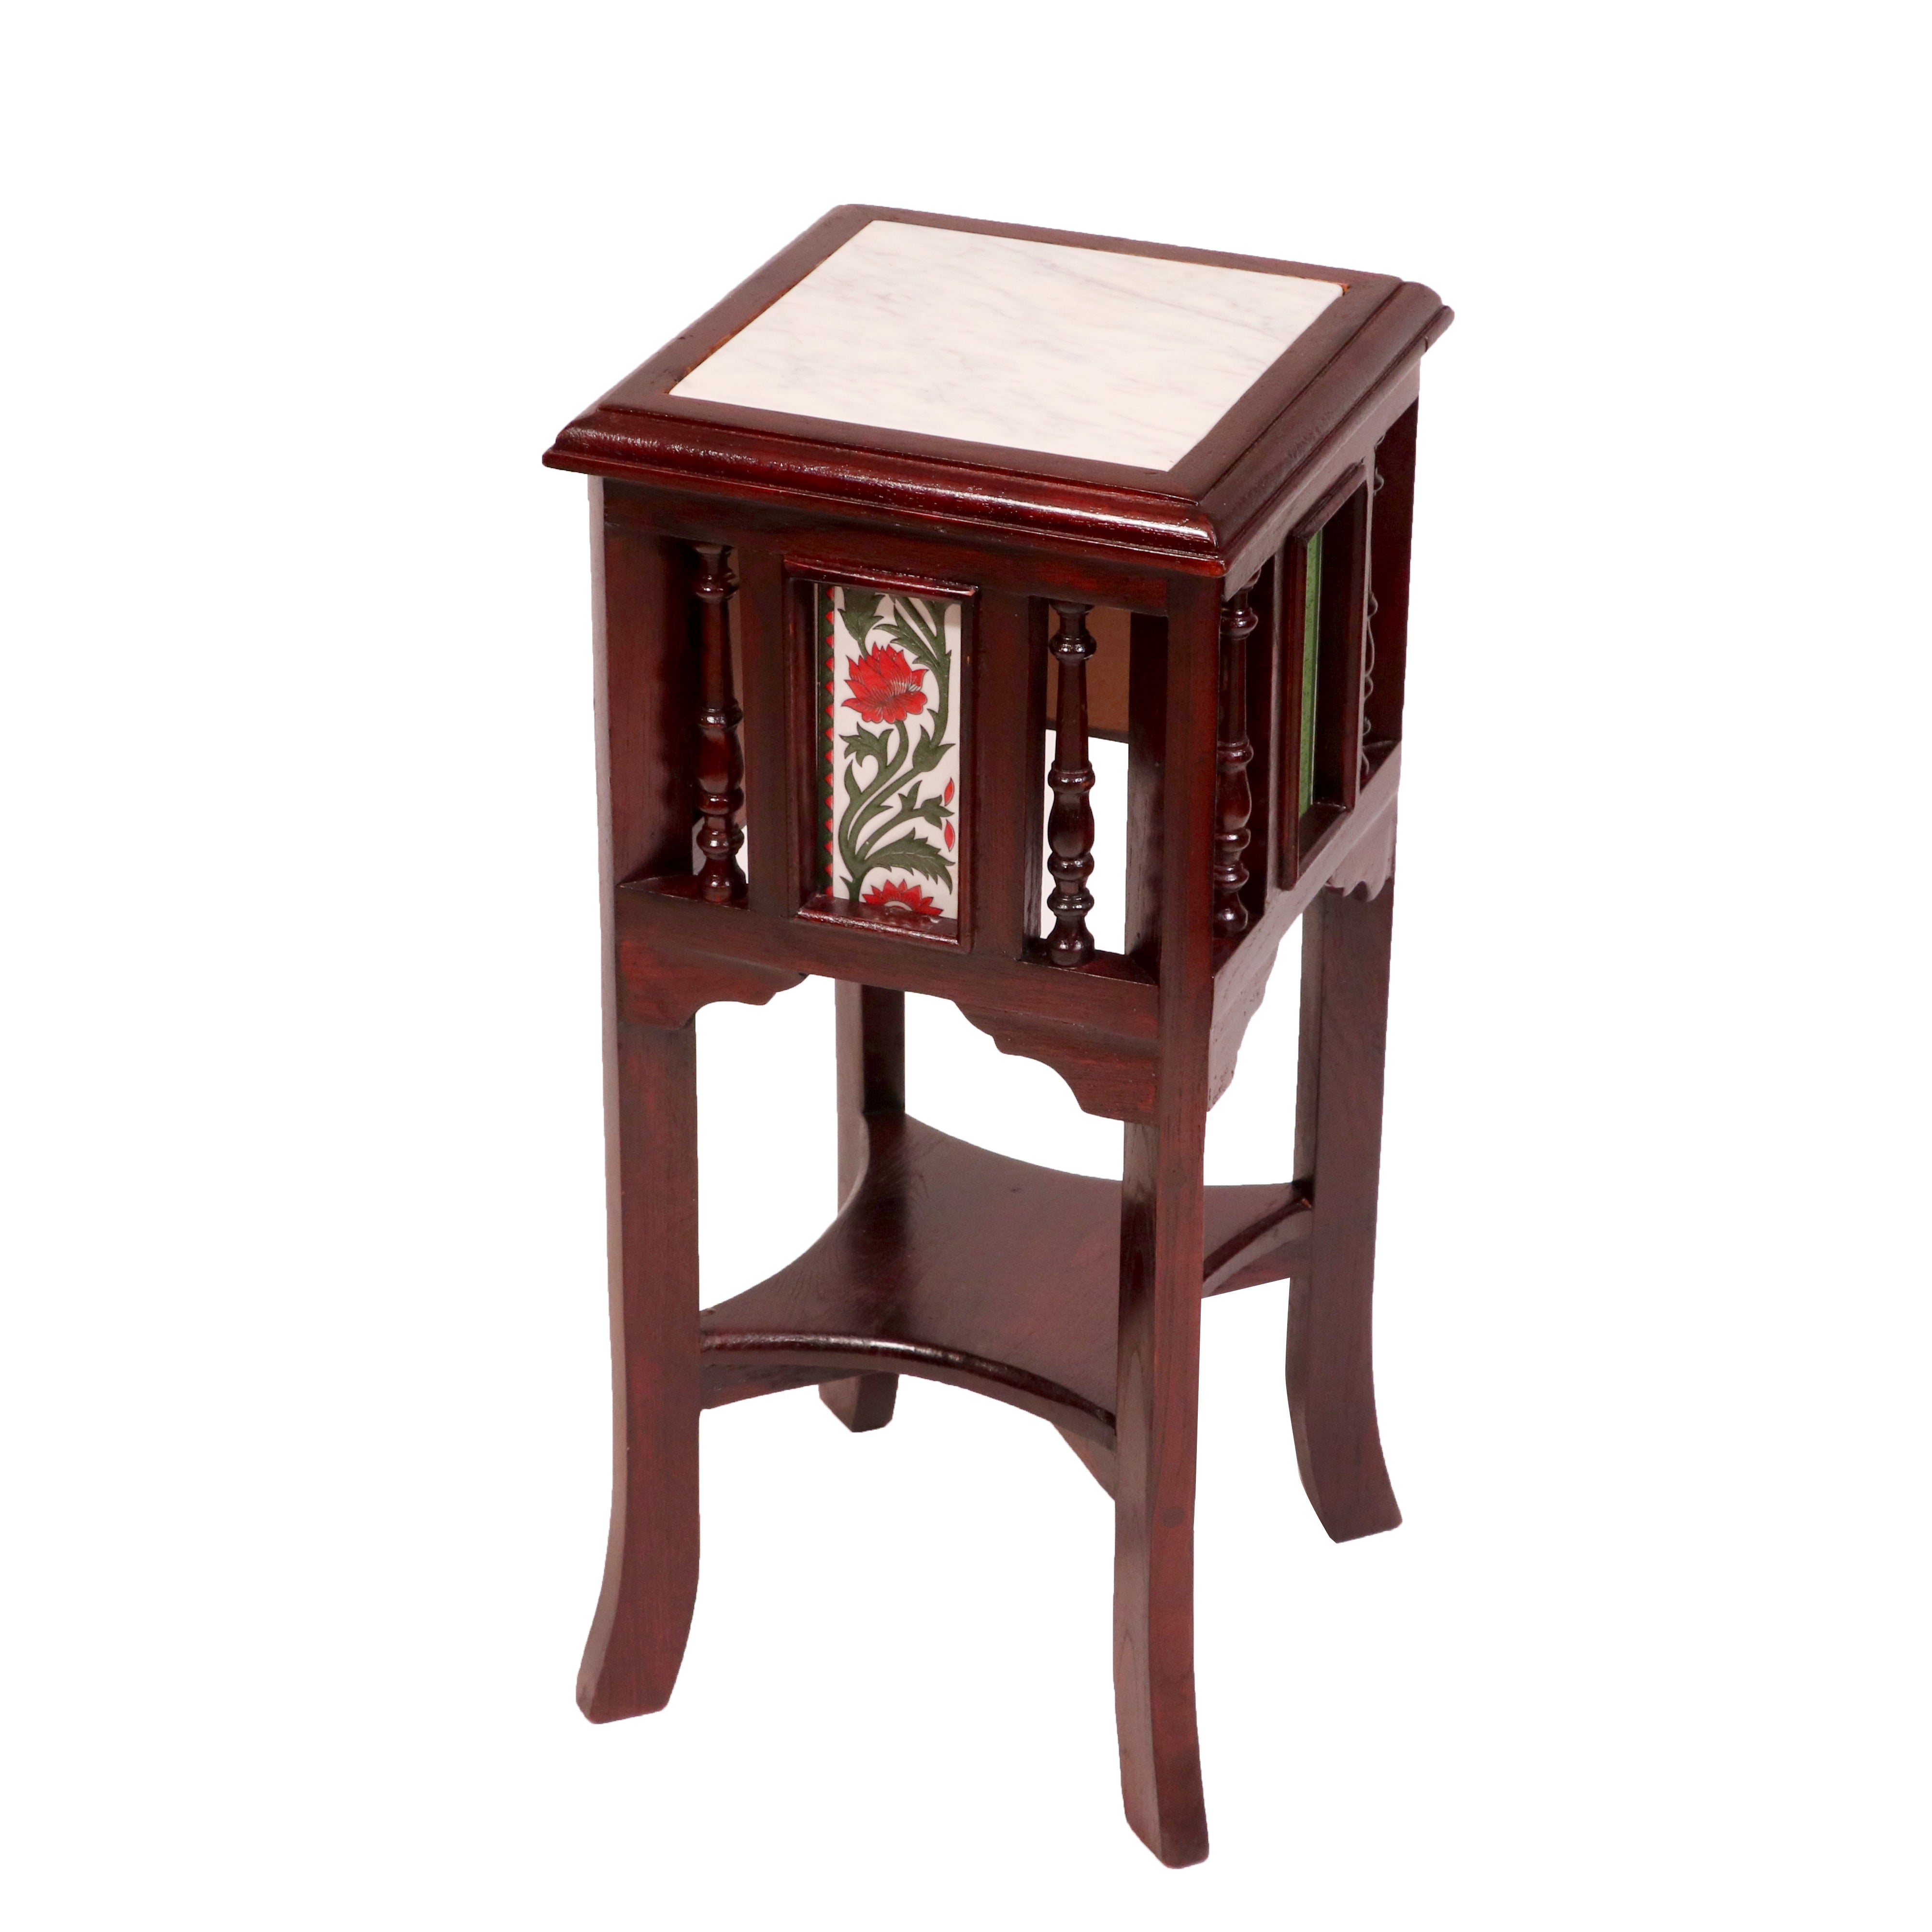 Teak ceramic tile end table with marble top 11 x 11 x 24 Inch End Table